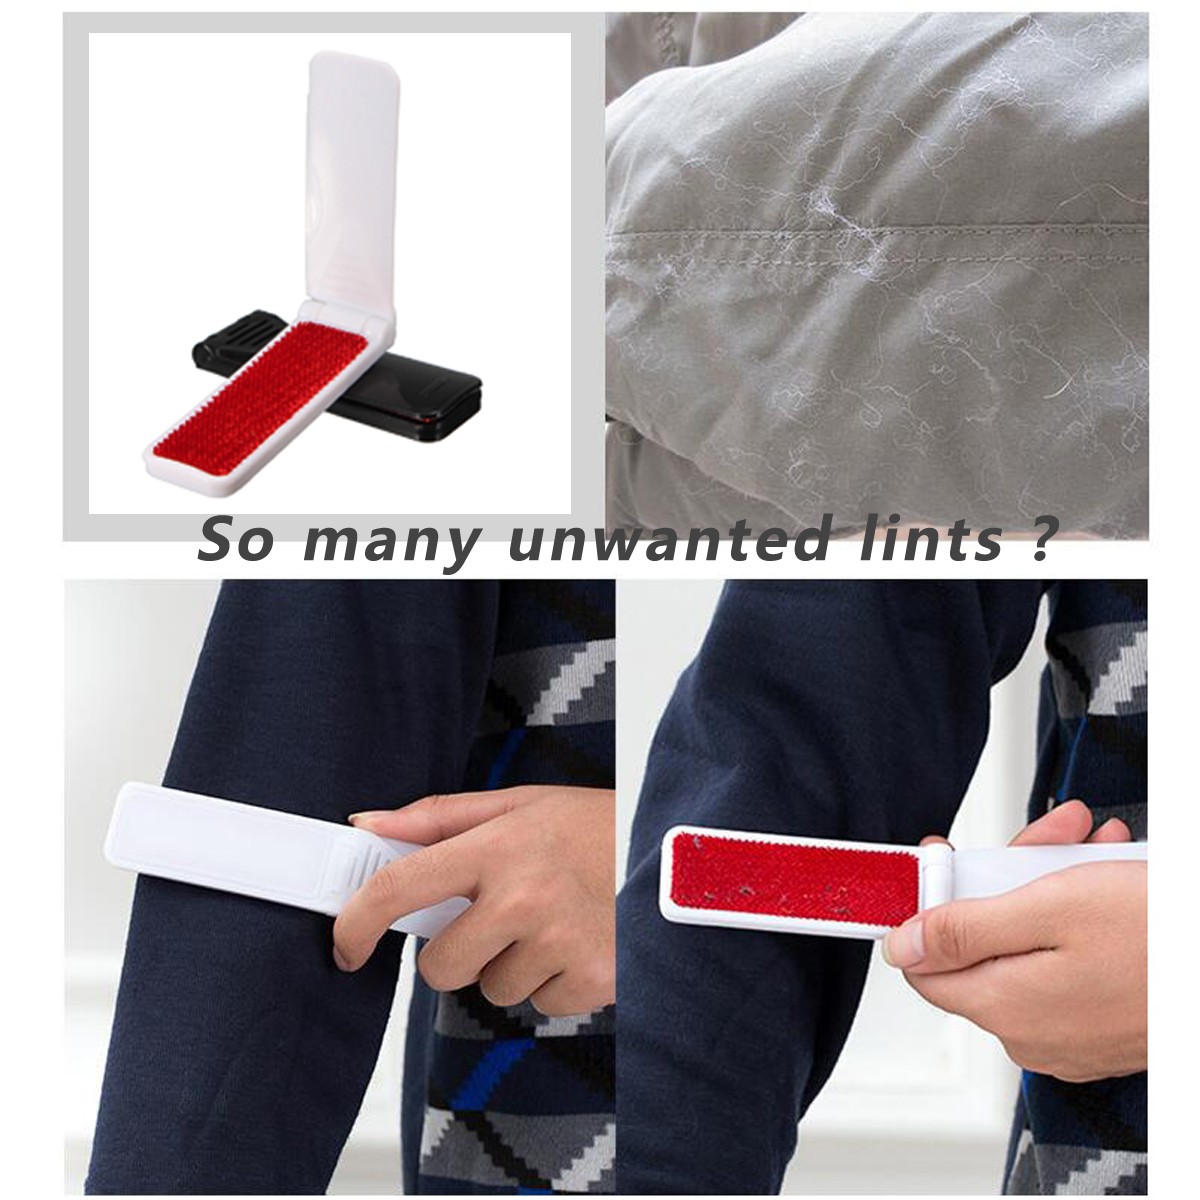 Foldable-Clothes-Brush-Lint-Dust-Remover-Portable-Fabric-Pet-Hair-Fluff-Clothes-Cleaner-1044119